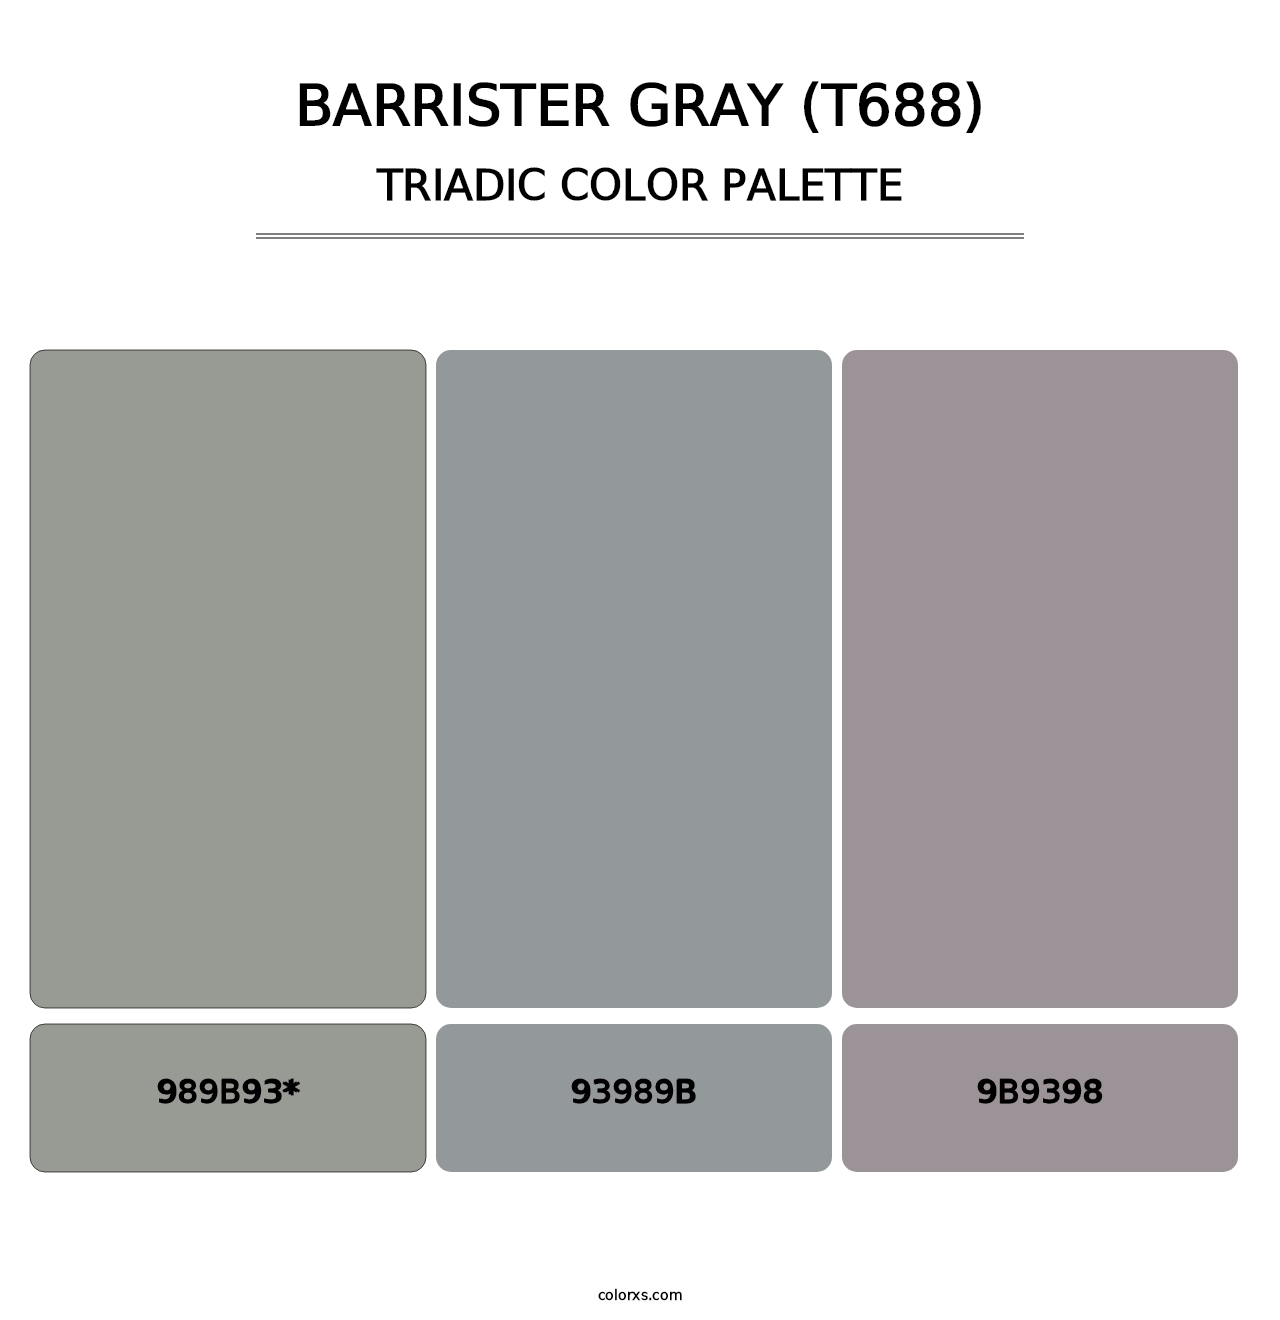 Barrister Gray (T688) - Triadic Color Palette